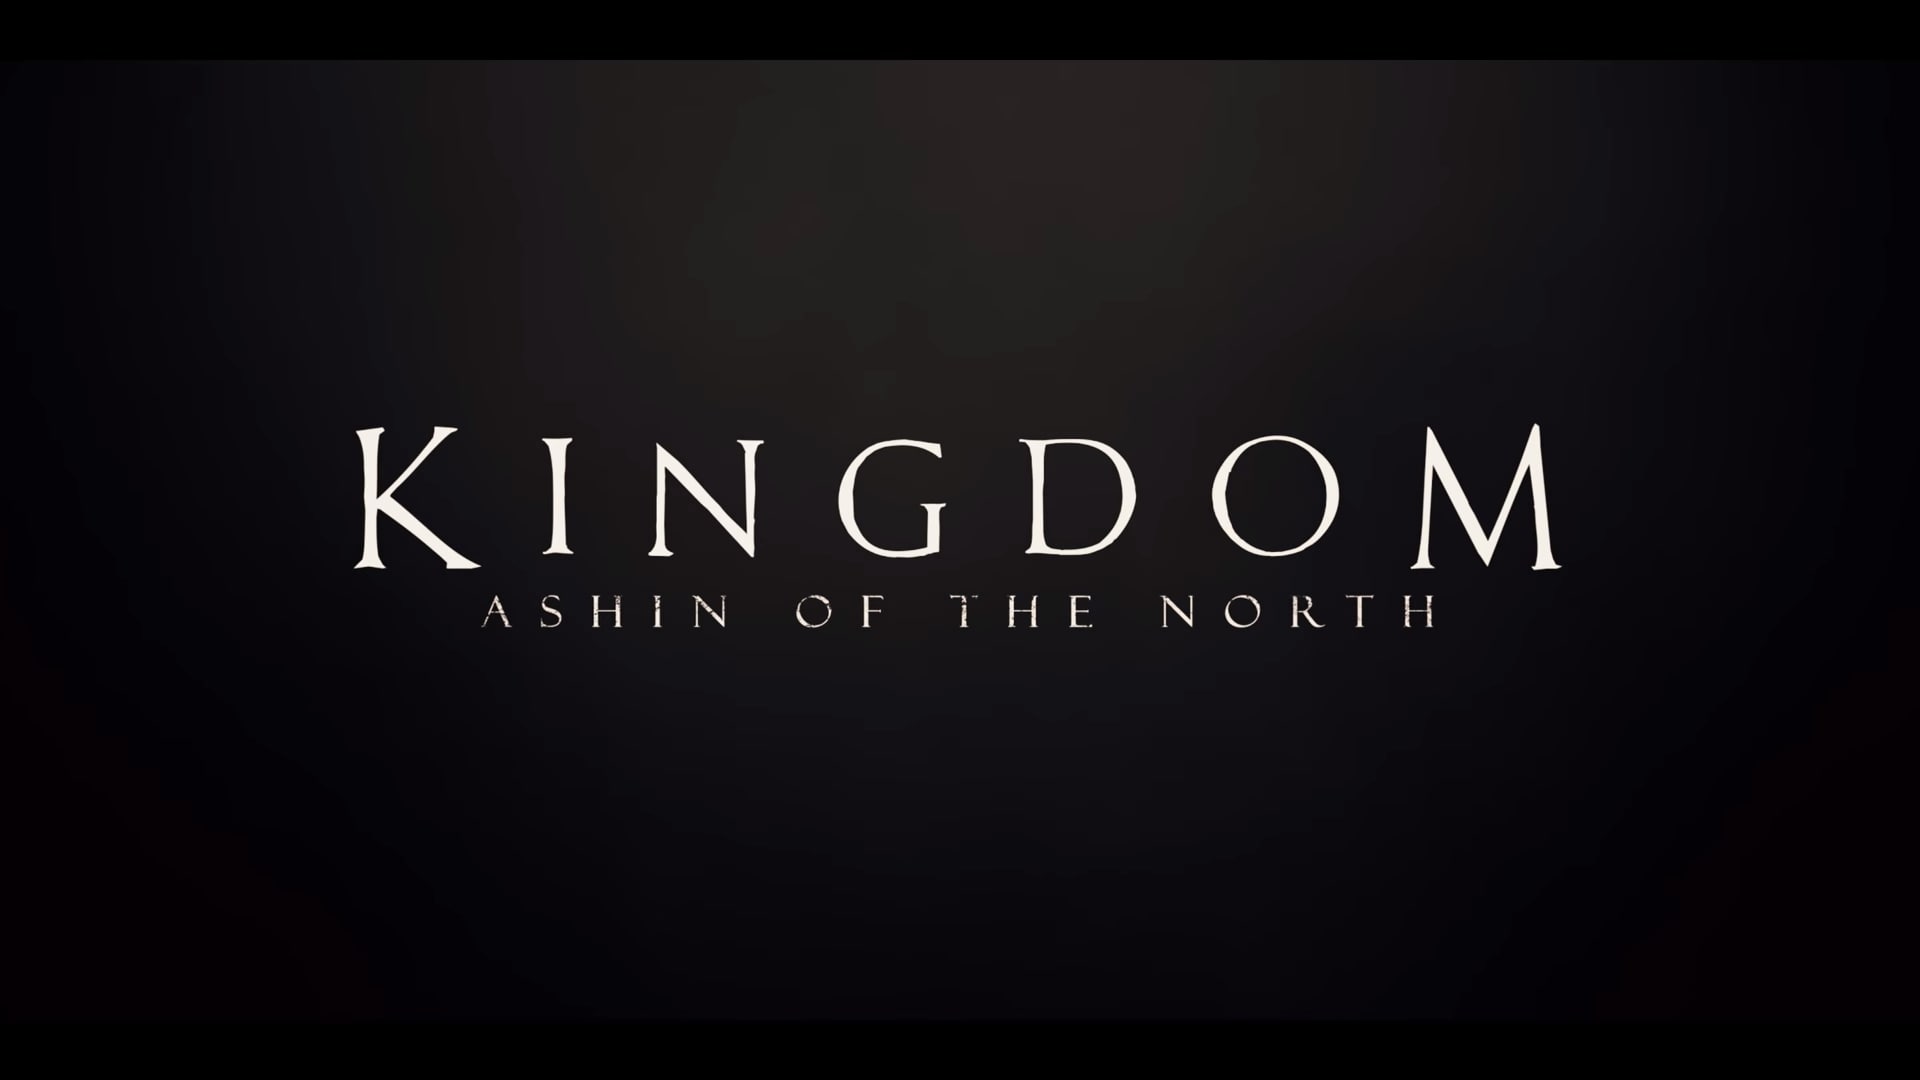 Netflix Kingdom Ashin of the North Trailer, Coming to Netflix in July 2021